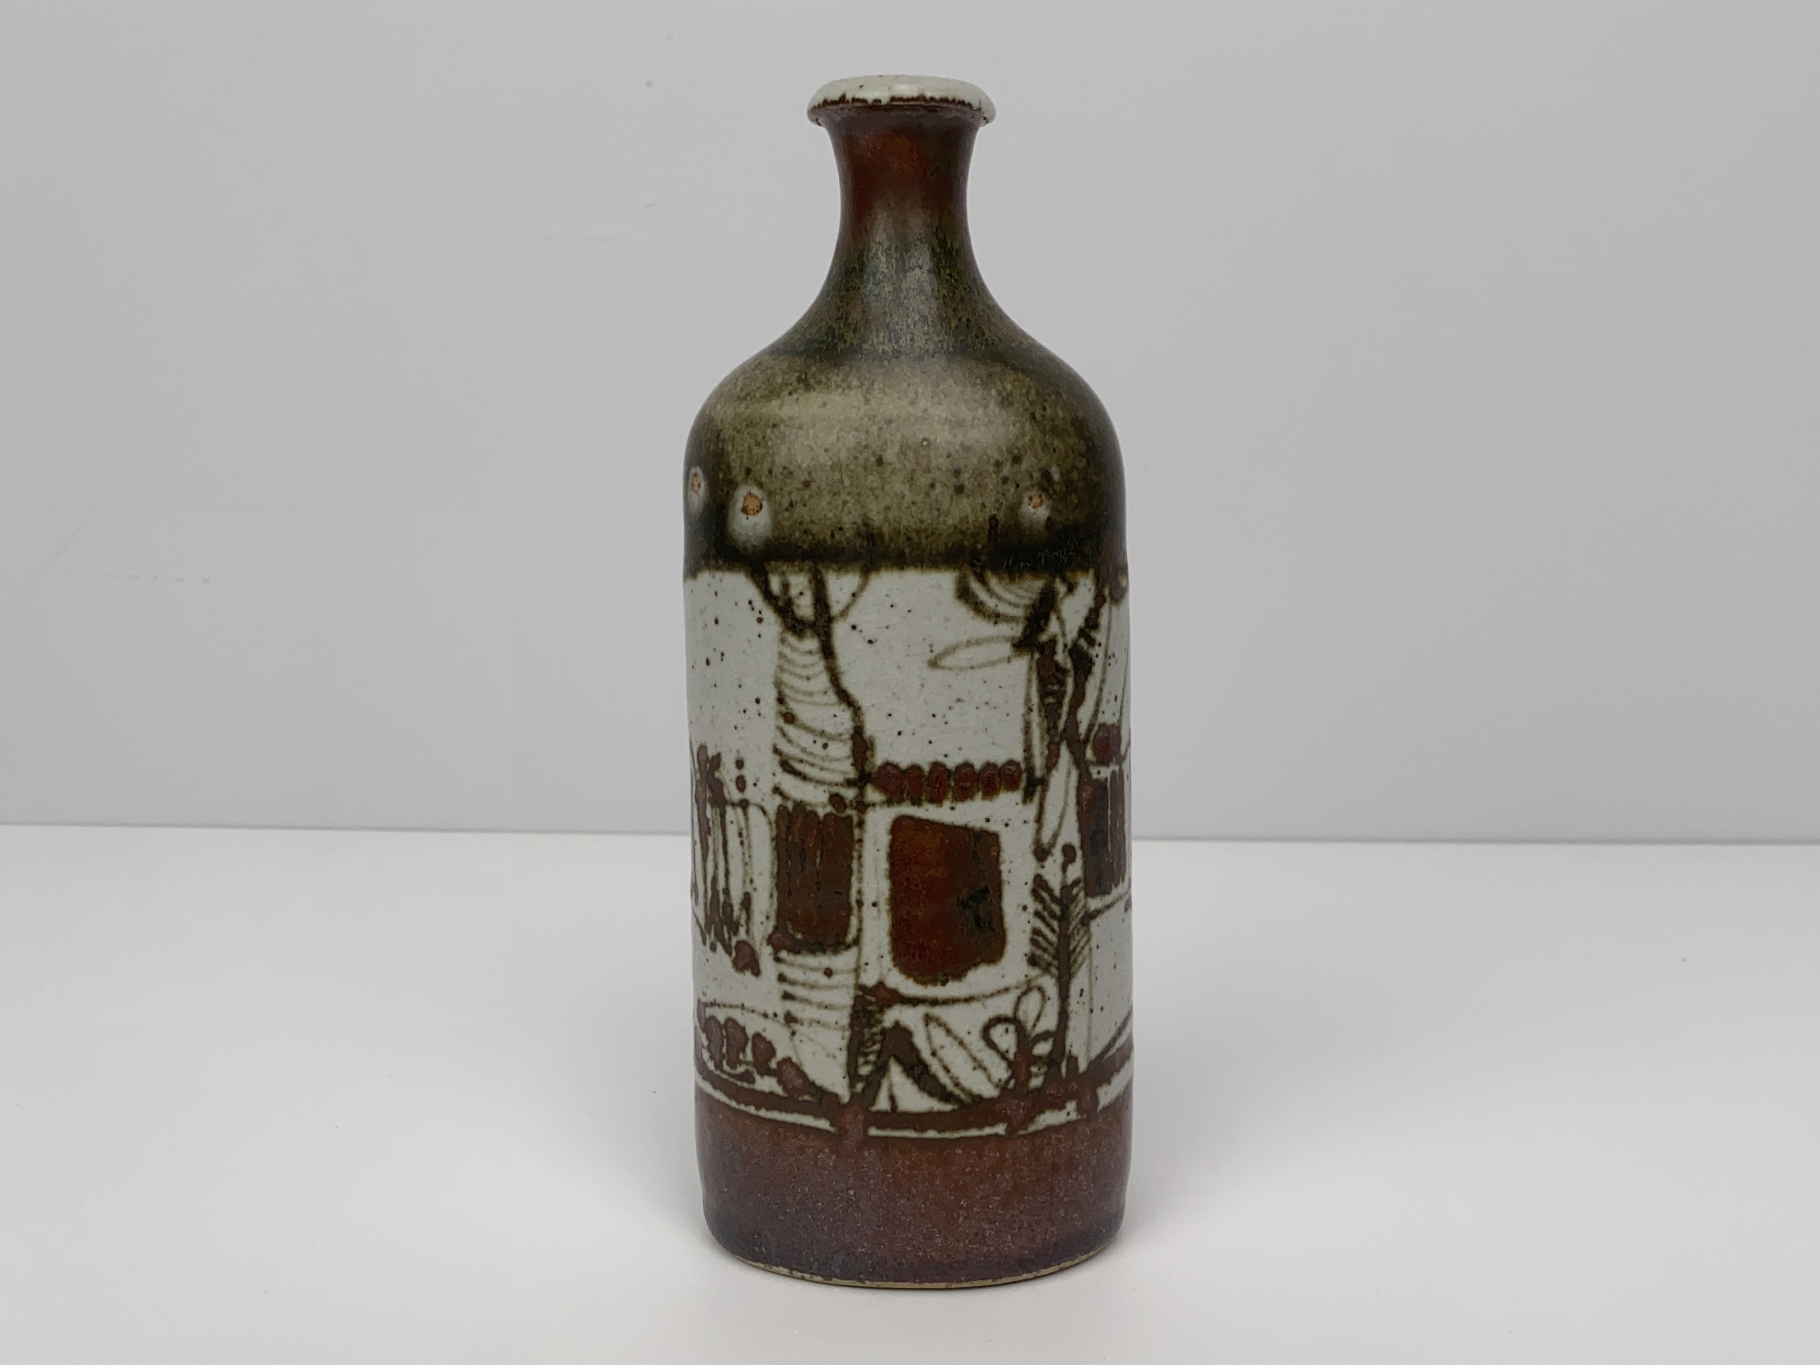 Vase, Ceramic, Stoneware, Unique Piece, painted with Iron Oxide, by Wilhelm & Elly Kuch, 1970s